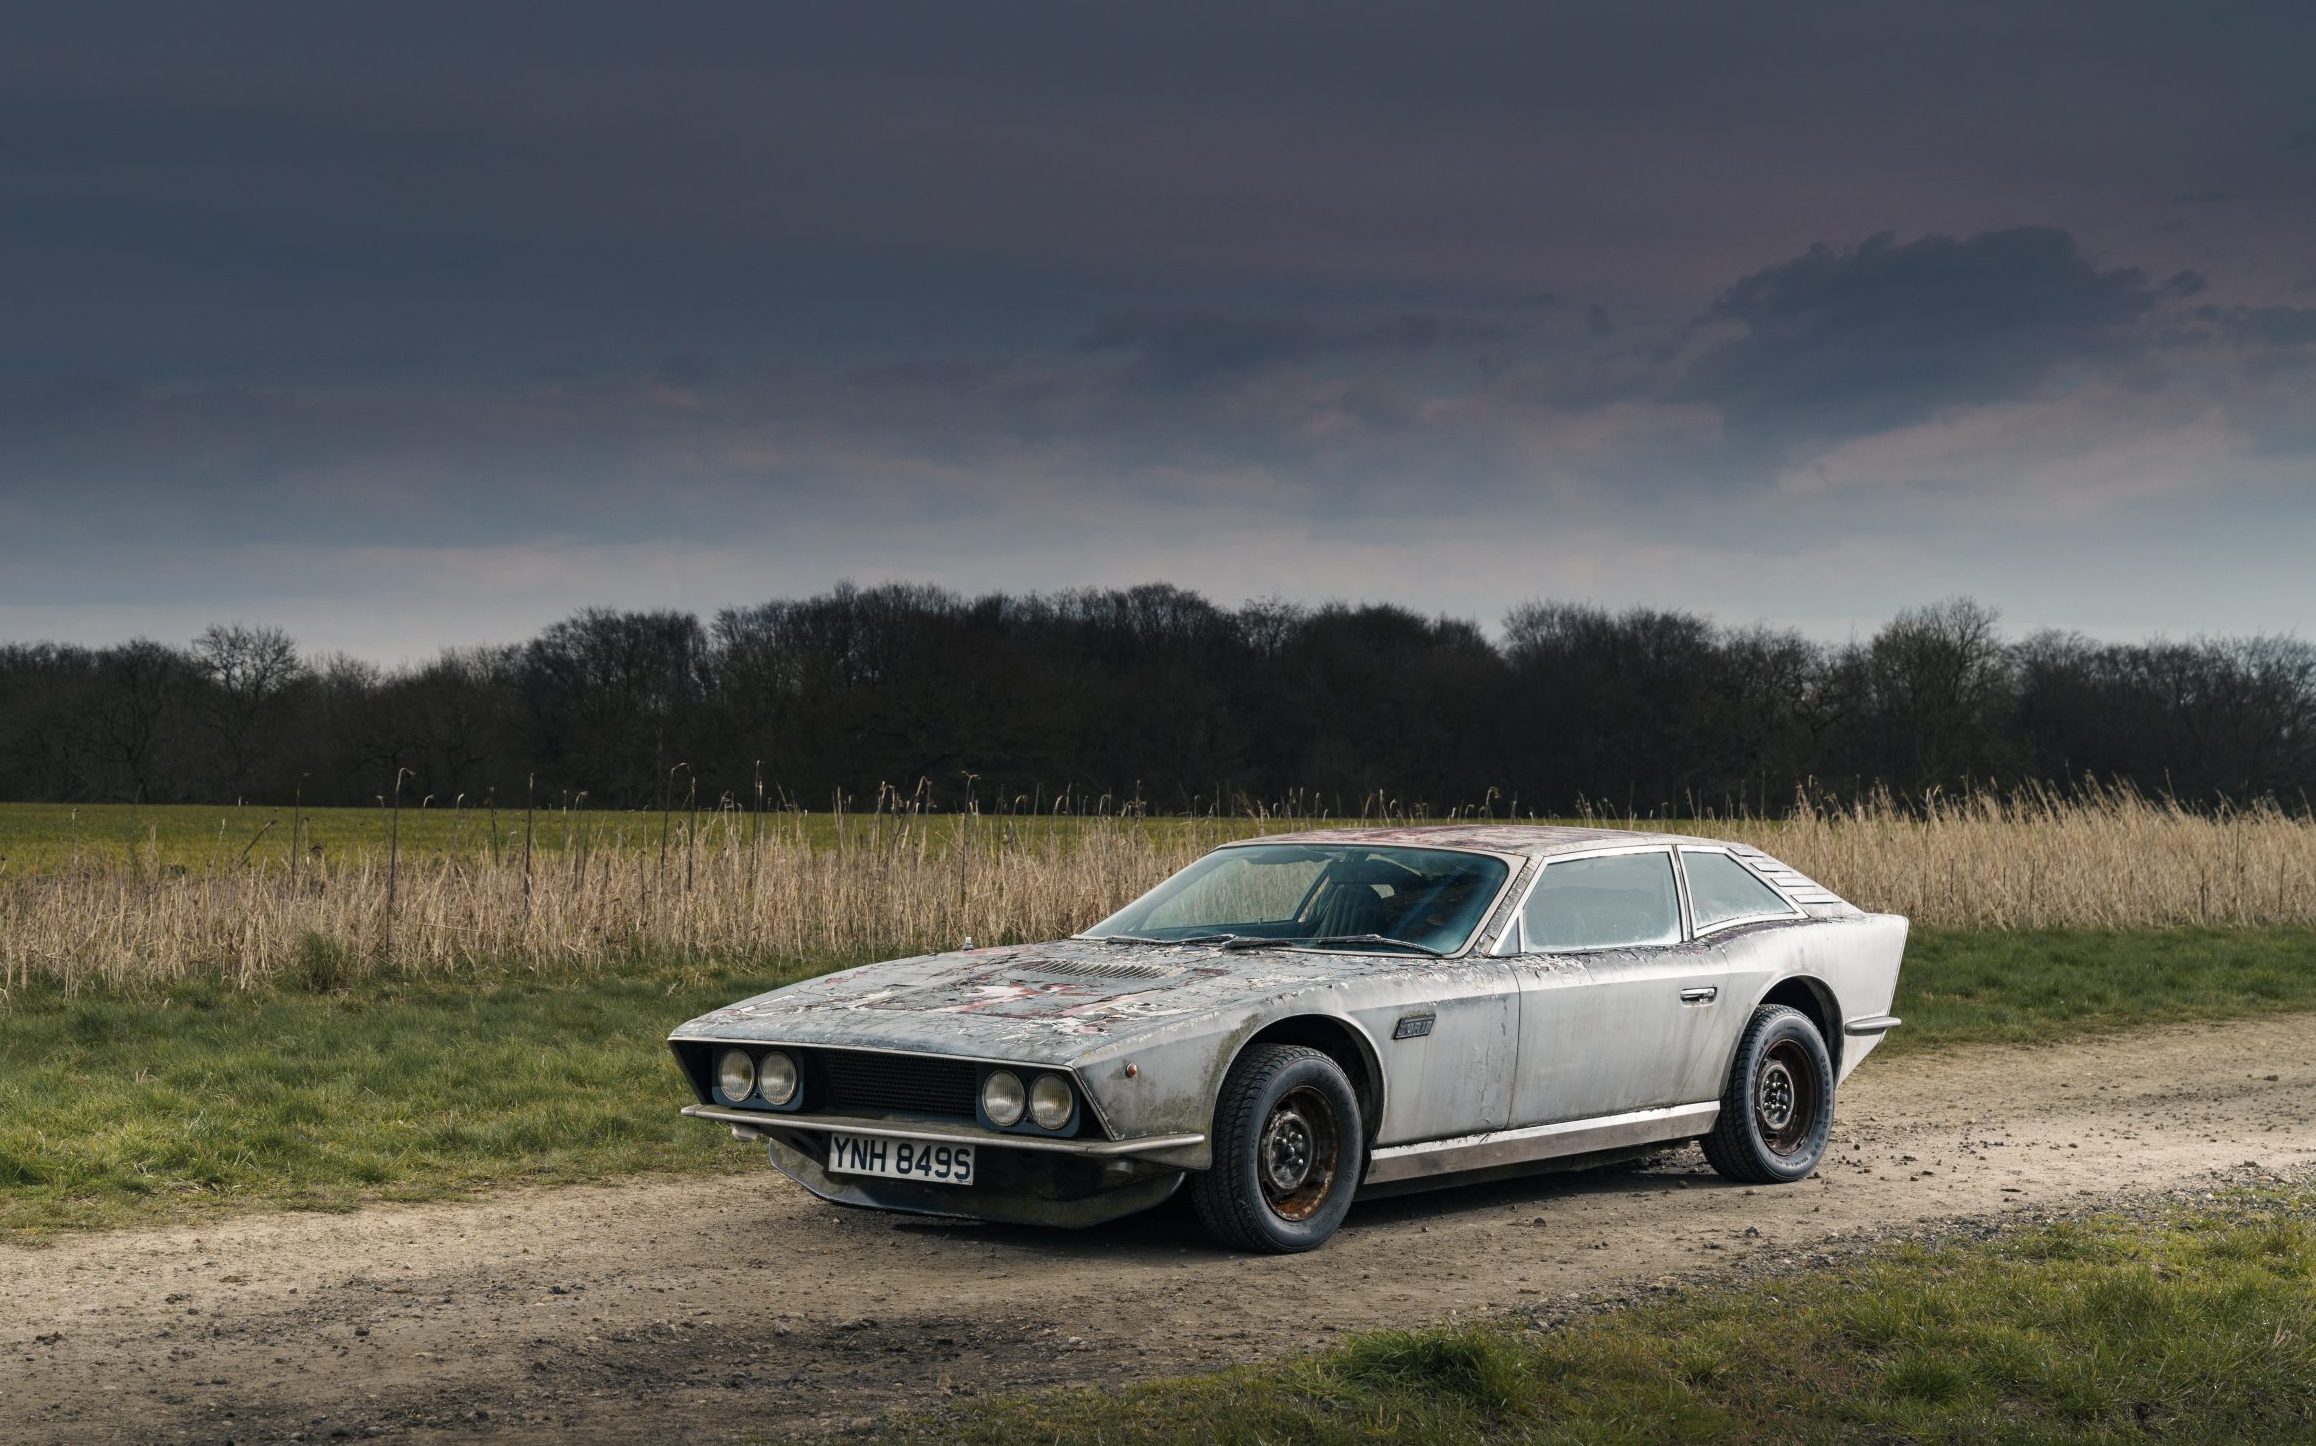 Built on a whim, abandoned for decades and discovered by accident, this is the story of the Furia GT